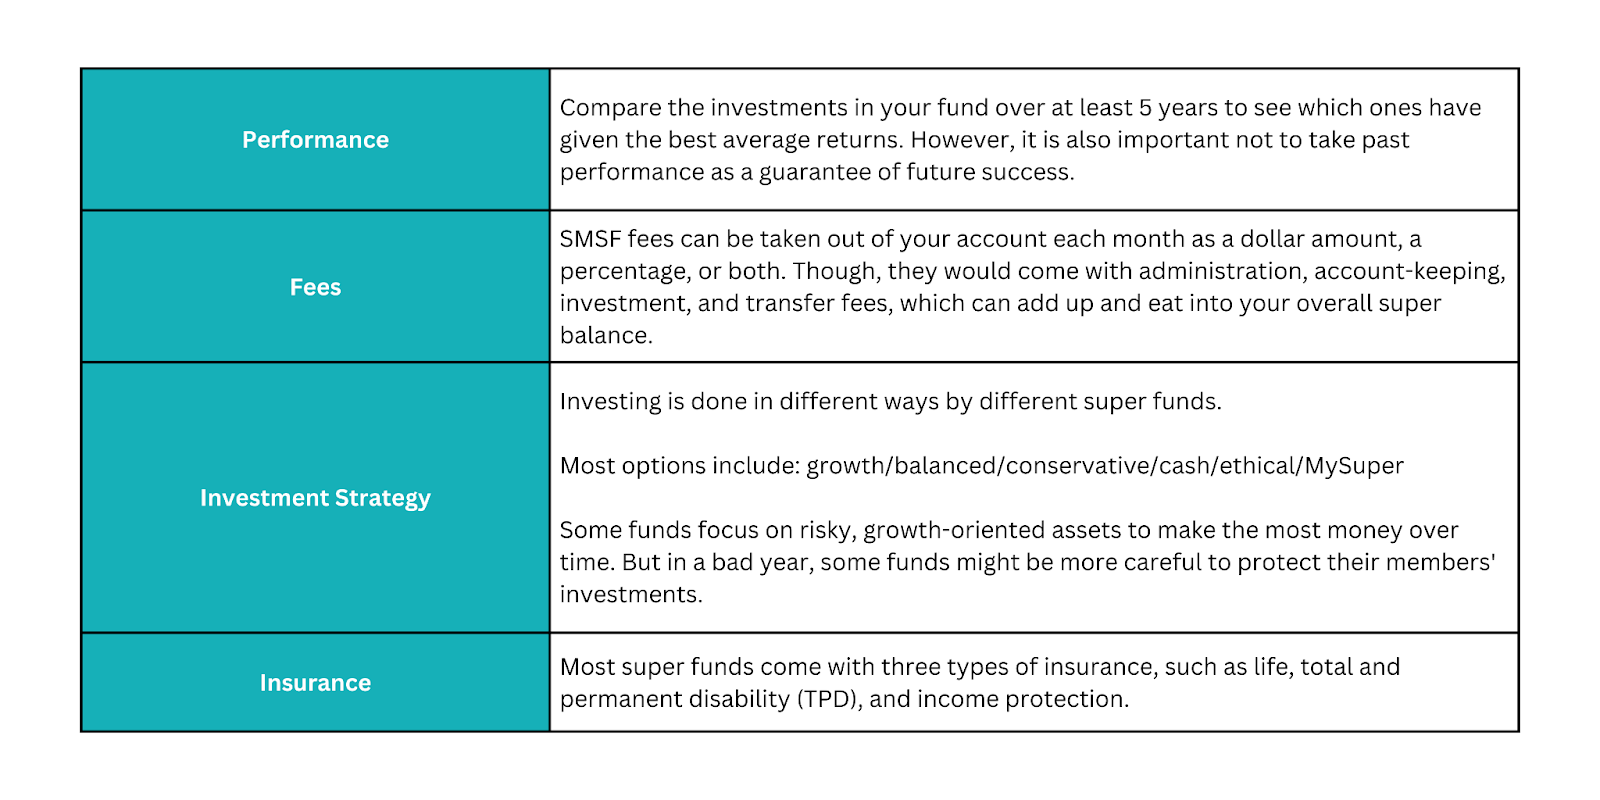 Table of what to look out for before choosing a super fund (performance, fees, investment strategy, insurance) 